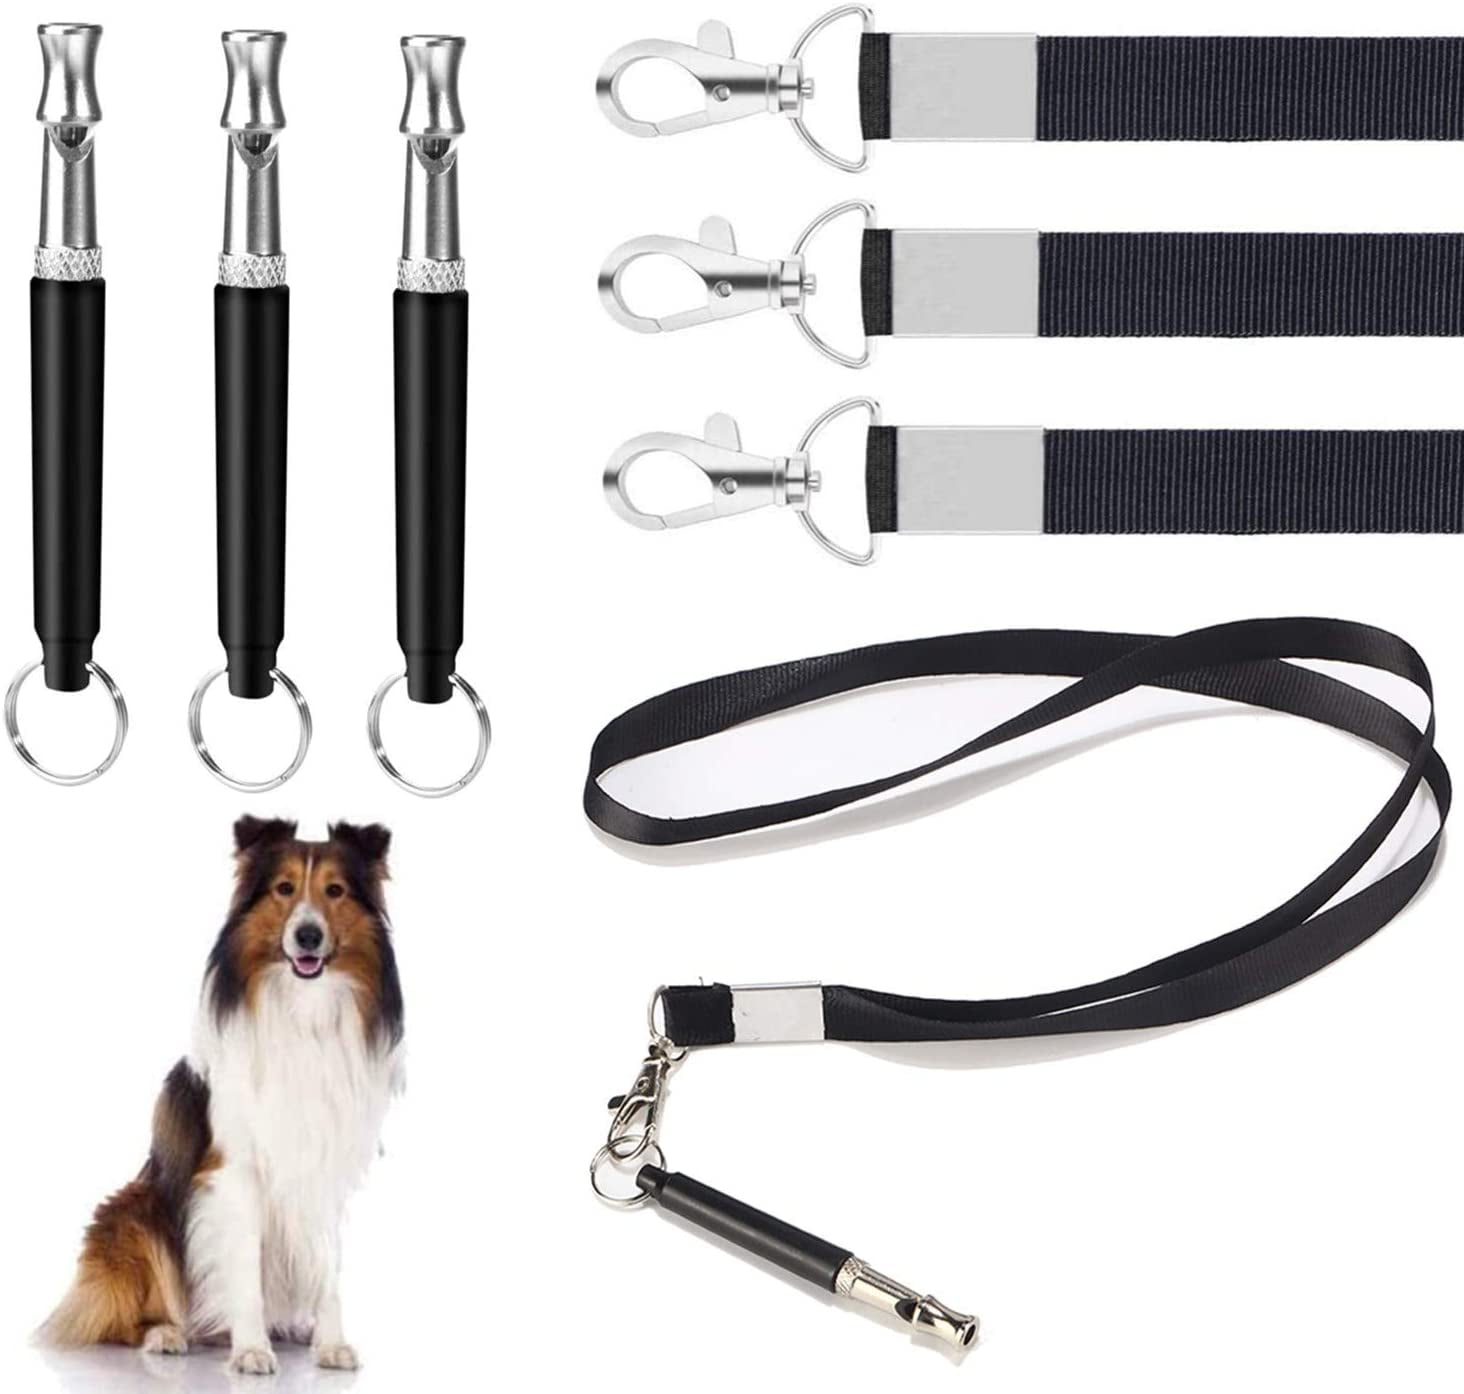 Dog Whistle Adjustable Ultrasonic Frequency Prevent Dogs from Barking Effective Dog Training Whistle Dog Whistle to Stop Barking 2 Pack 